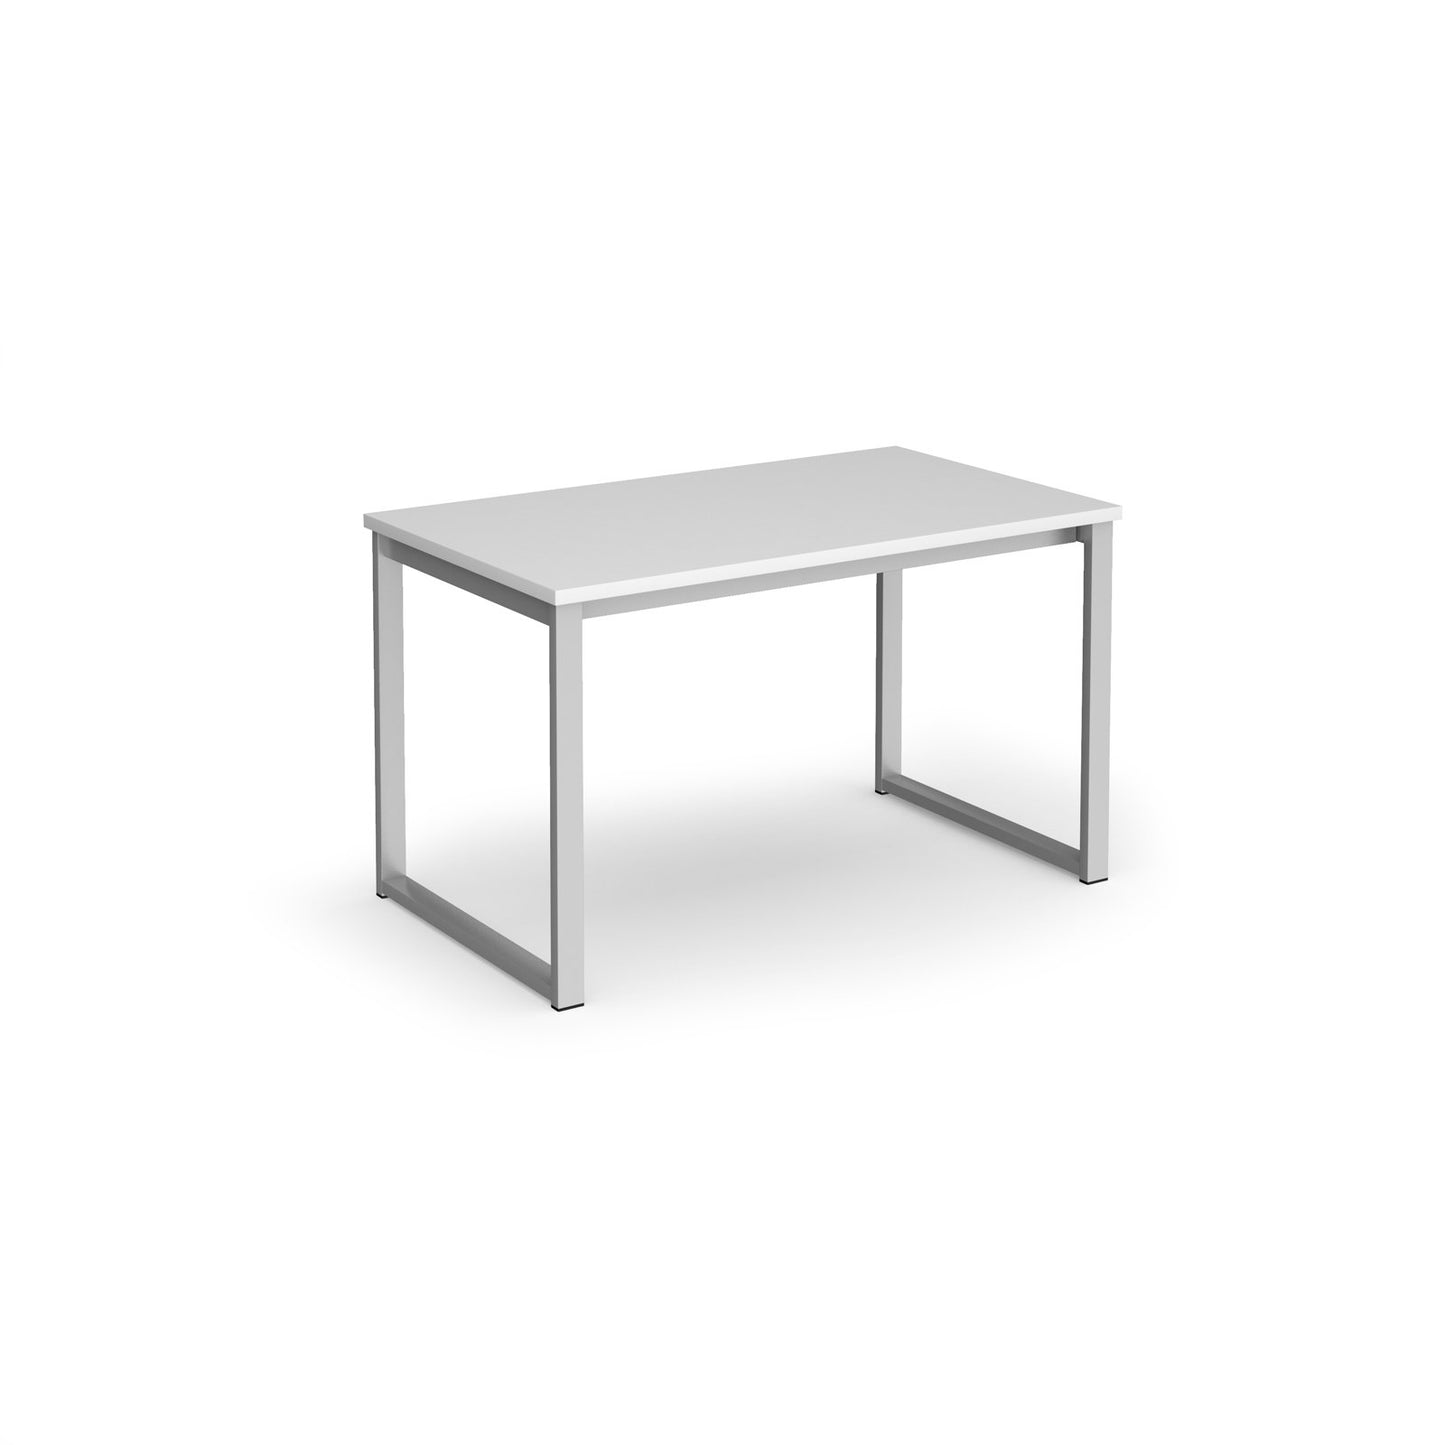 Otto dining table